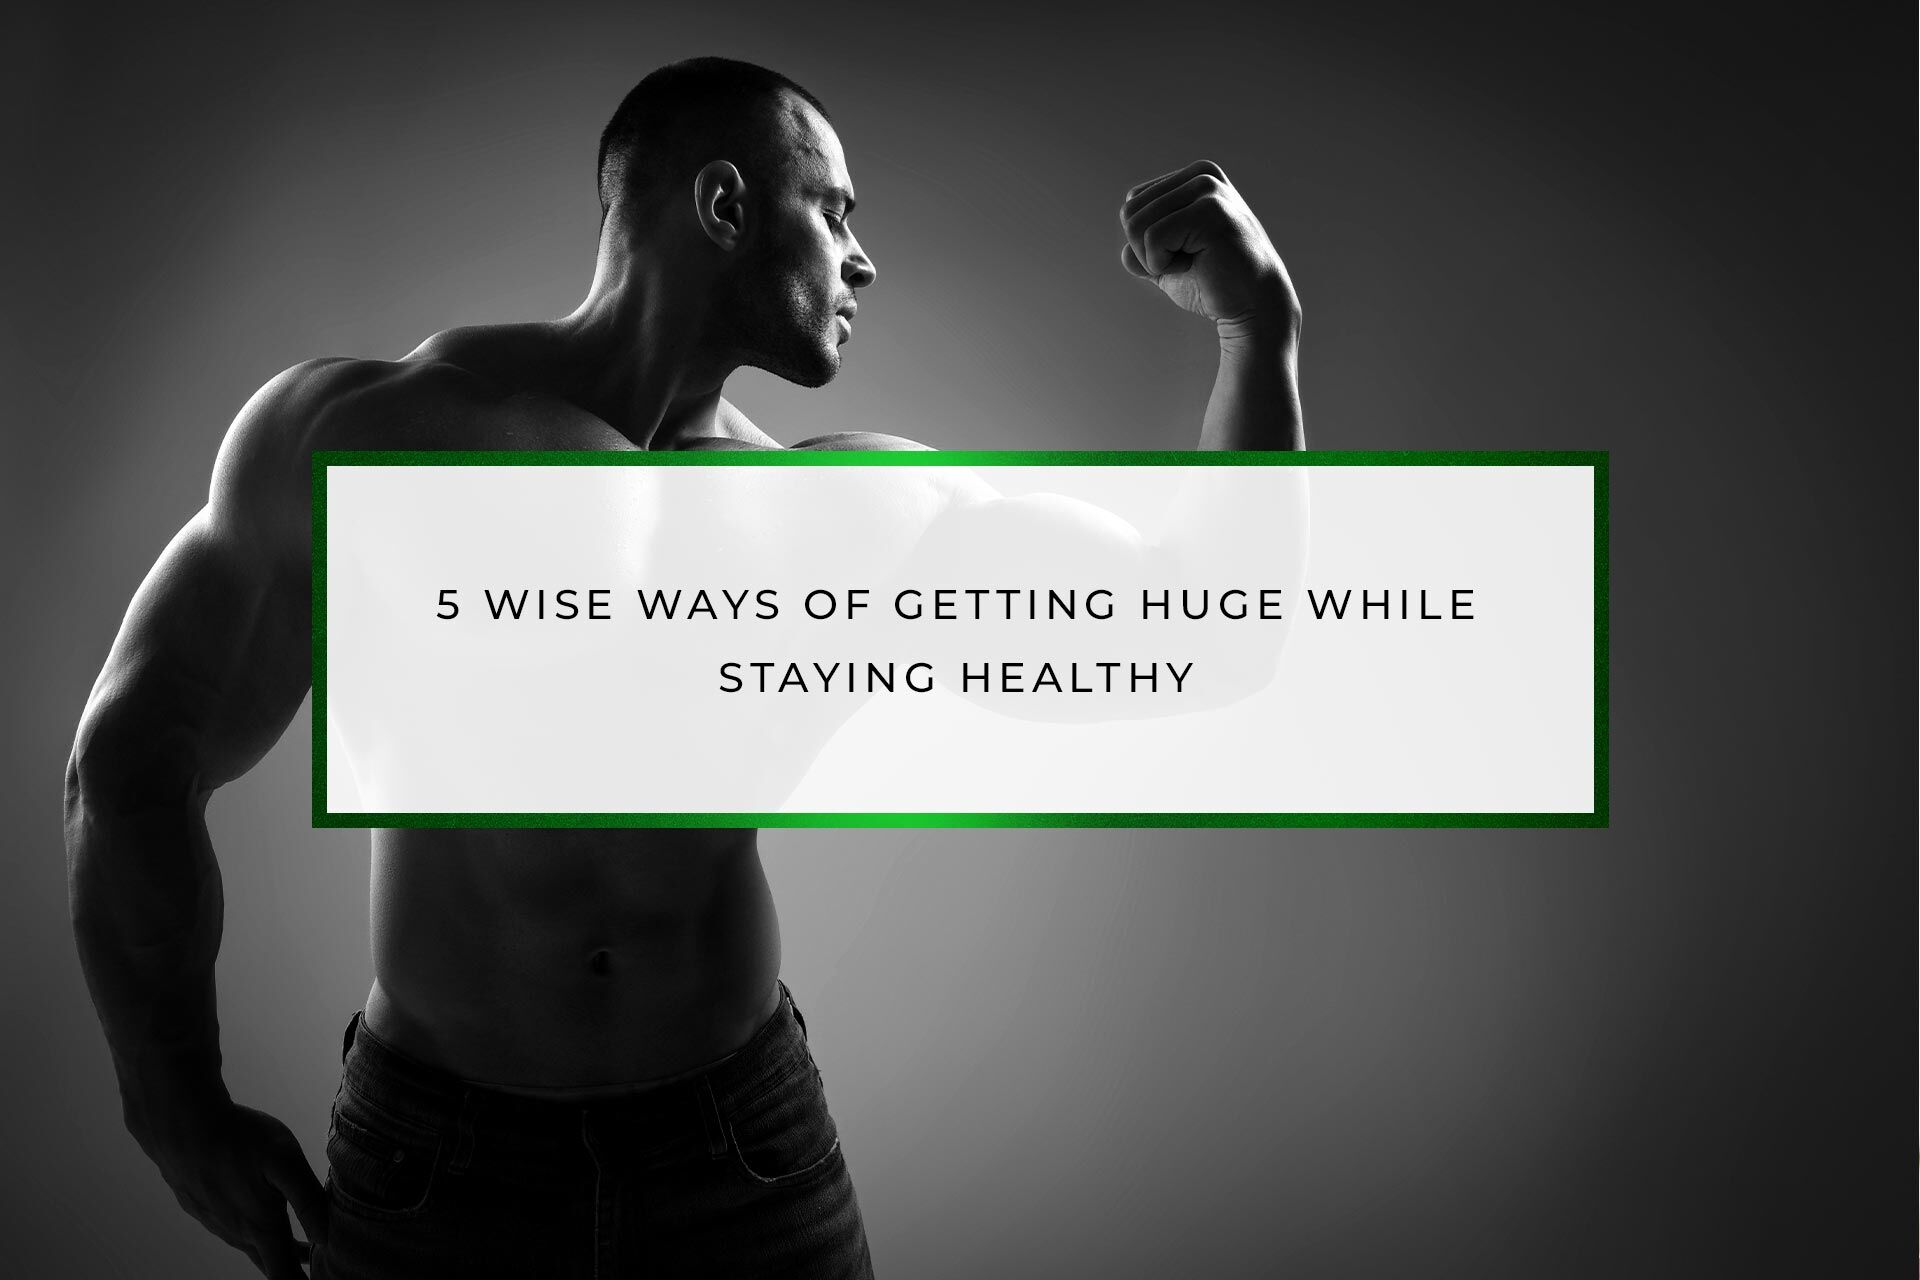 5 Wise Ways of Getting Huge While Staying Healthy